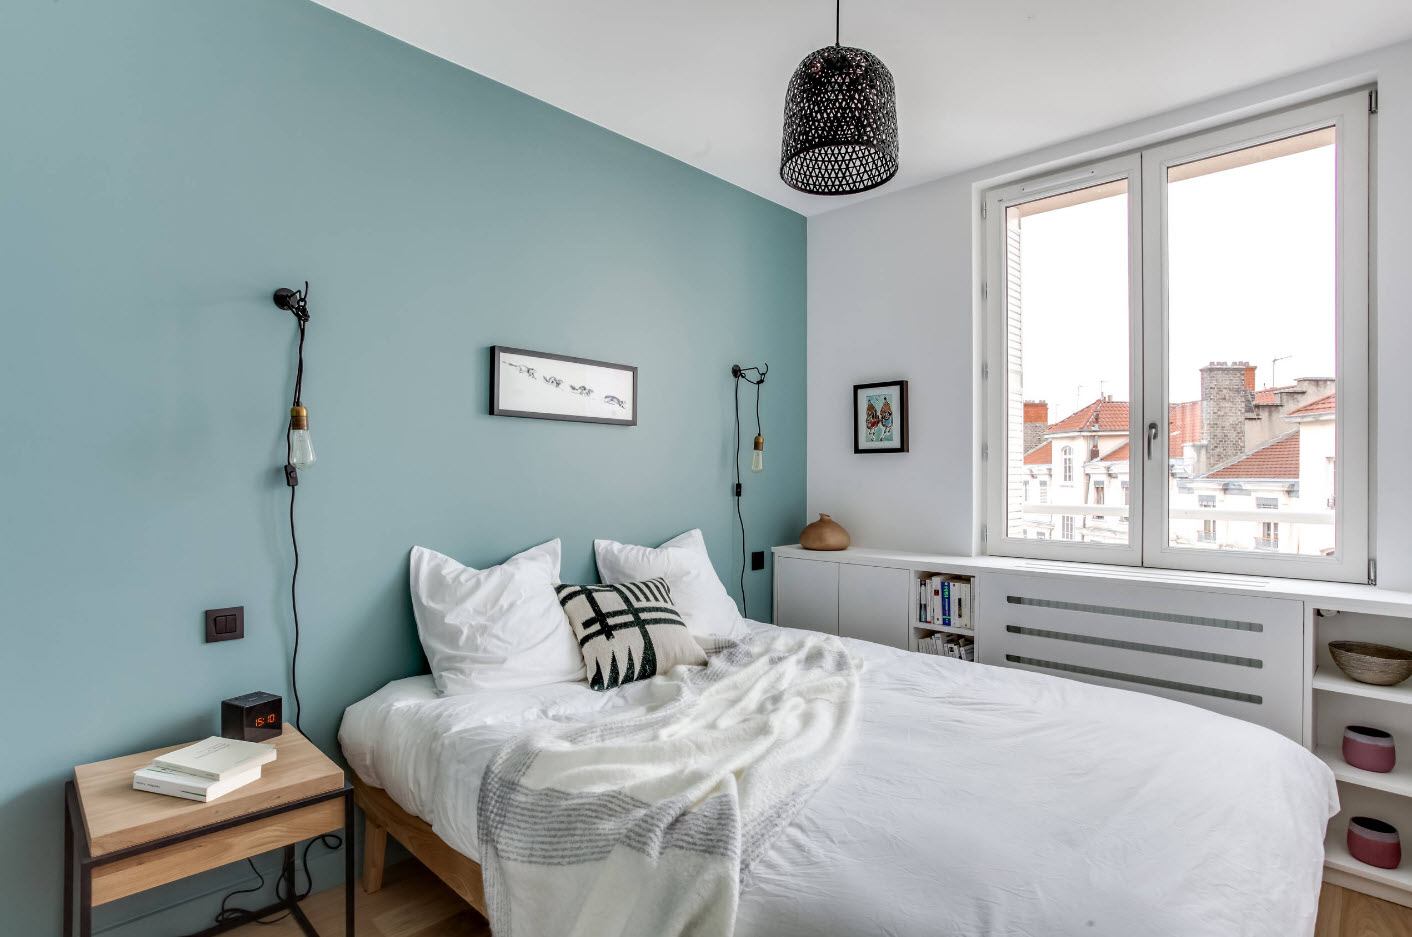 Aquamarine colored accent wall in the modern Scandi styled bedroom interior